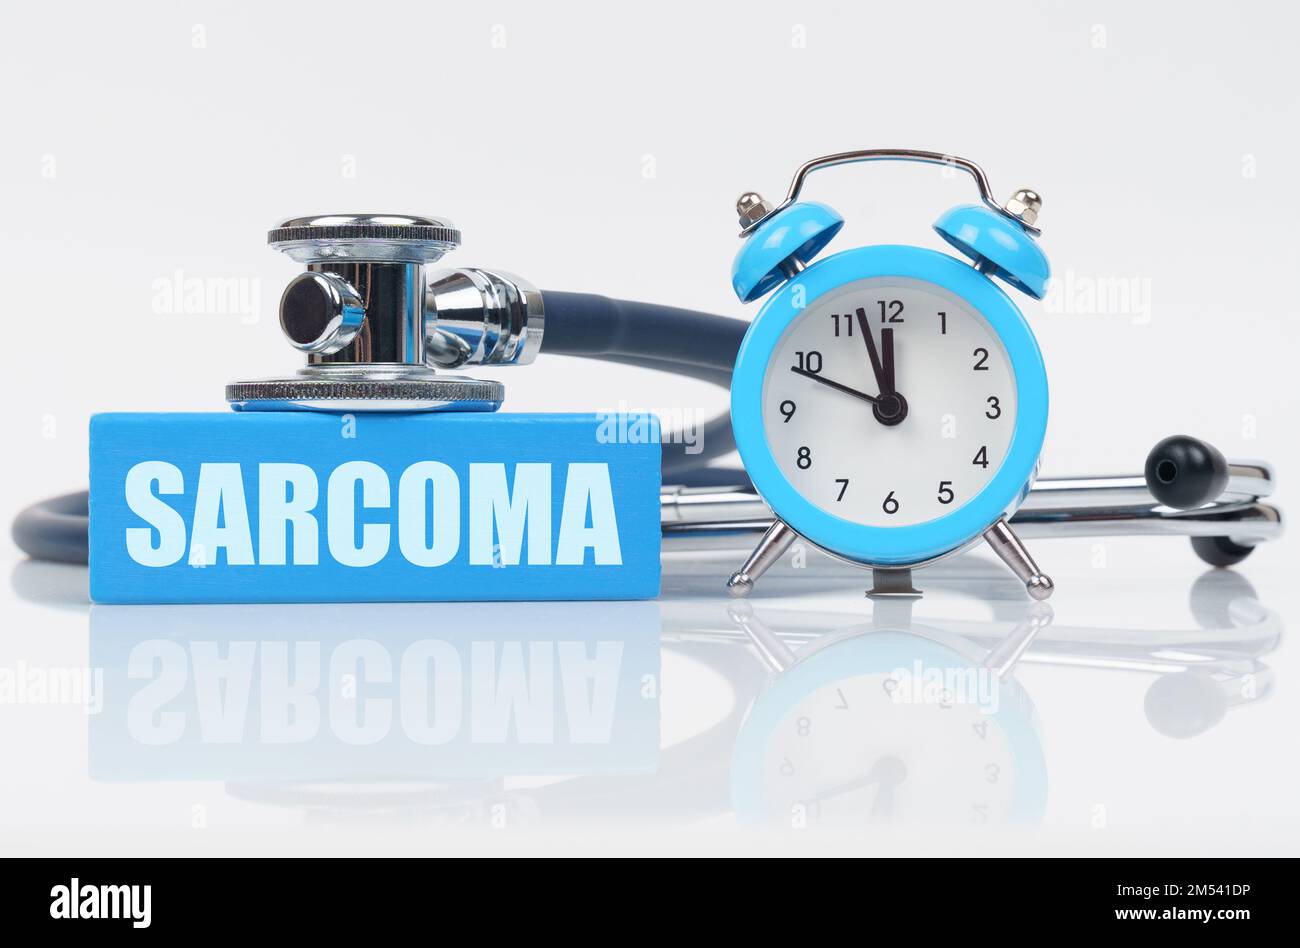 Medical concept. On a white surface there is an alarm clock, a stethoscope and a blue block with the inscription - SARCOMA Stock Photo